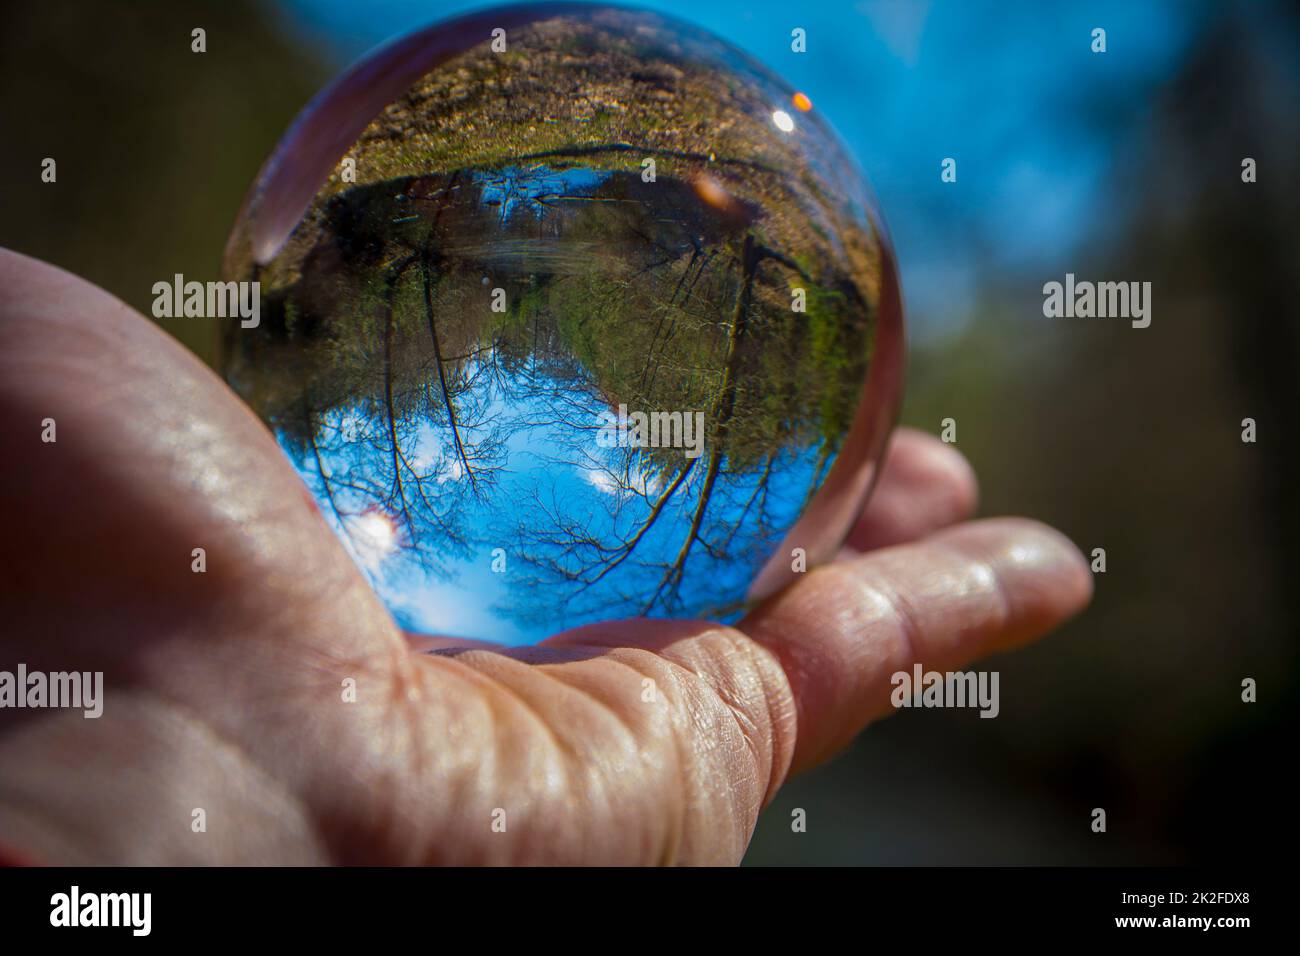 Hand holding glass ball with inverted nature and landscape image Stock Photo